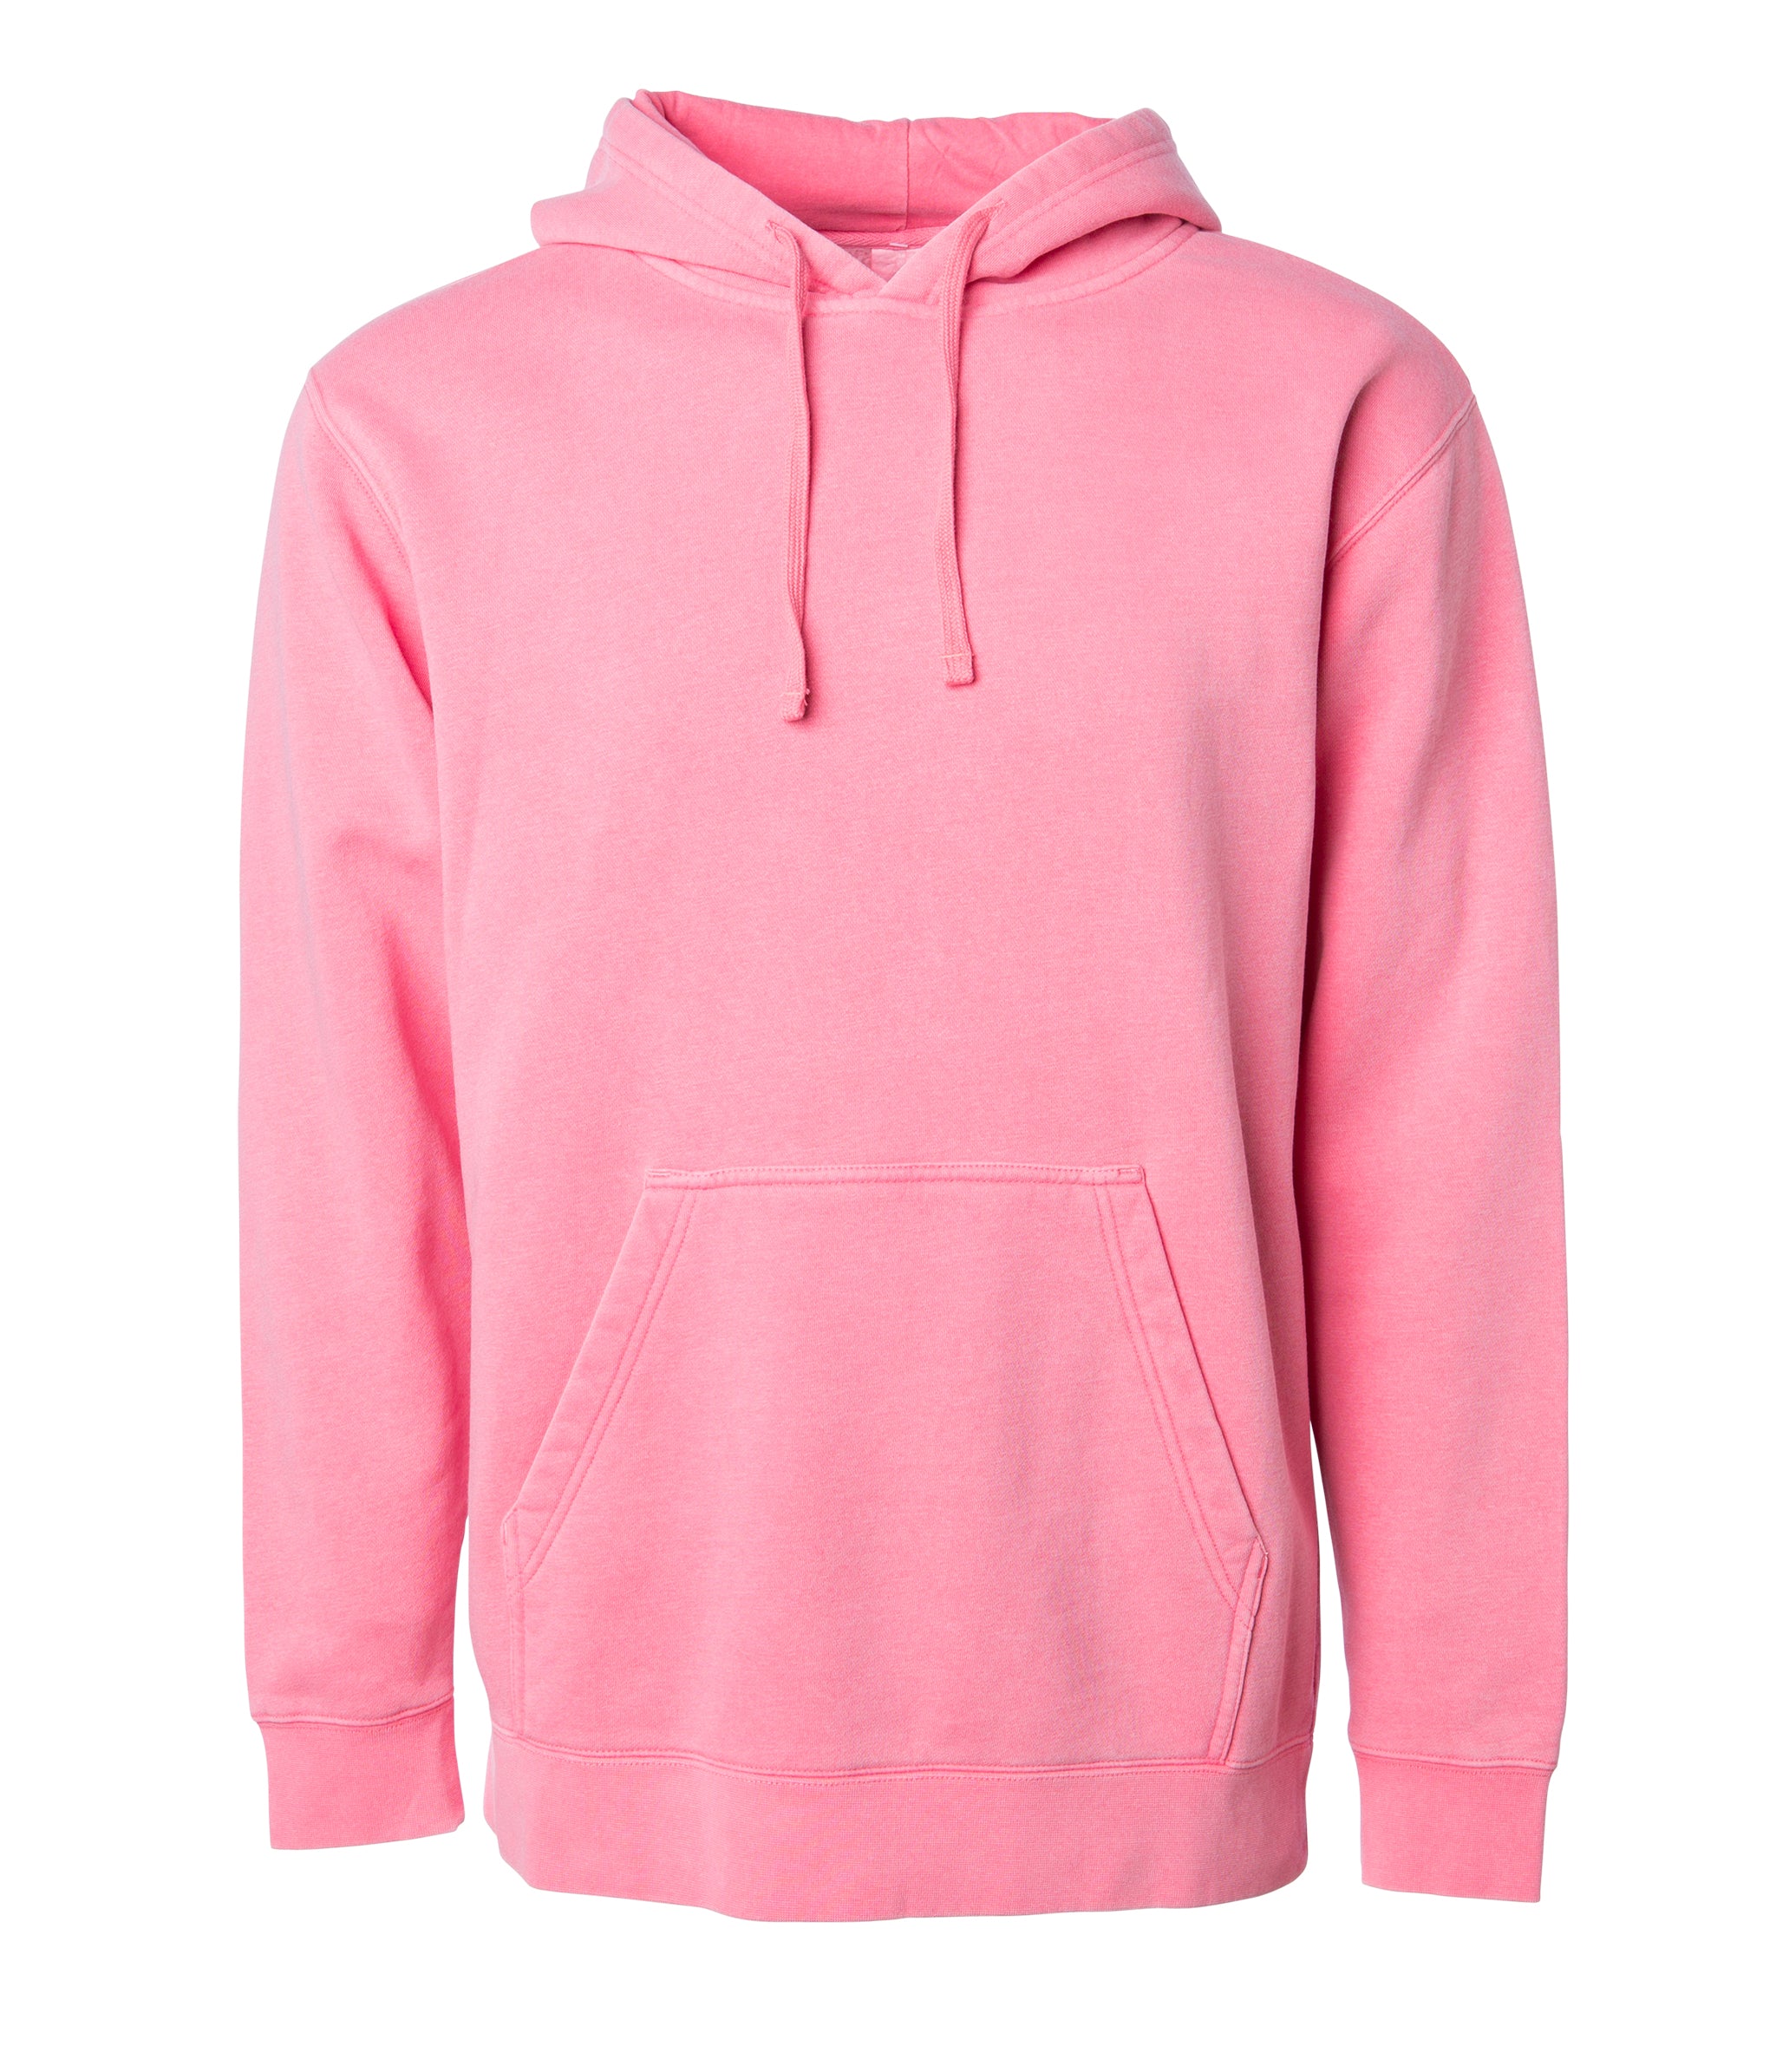 Unisex Midweight Pigment Dyed Hooded Pullover  Unique Vintage Character -  Independent Trading Company